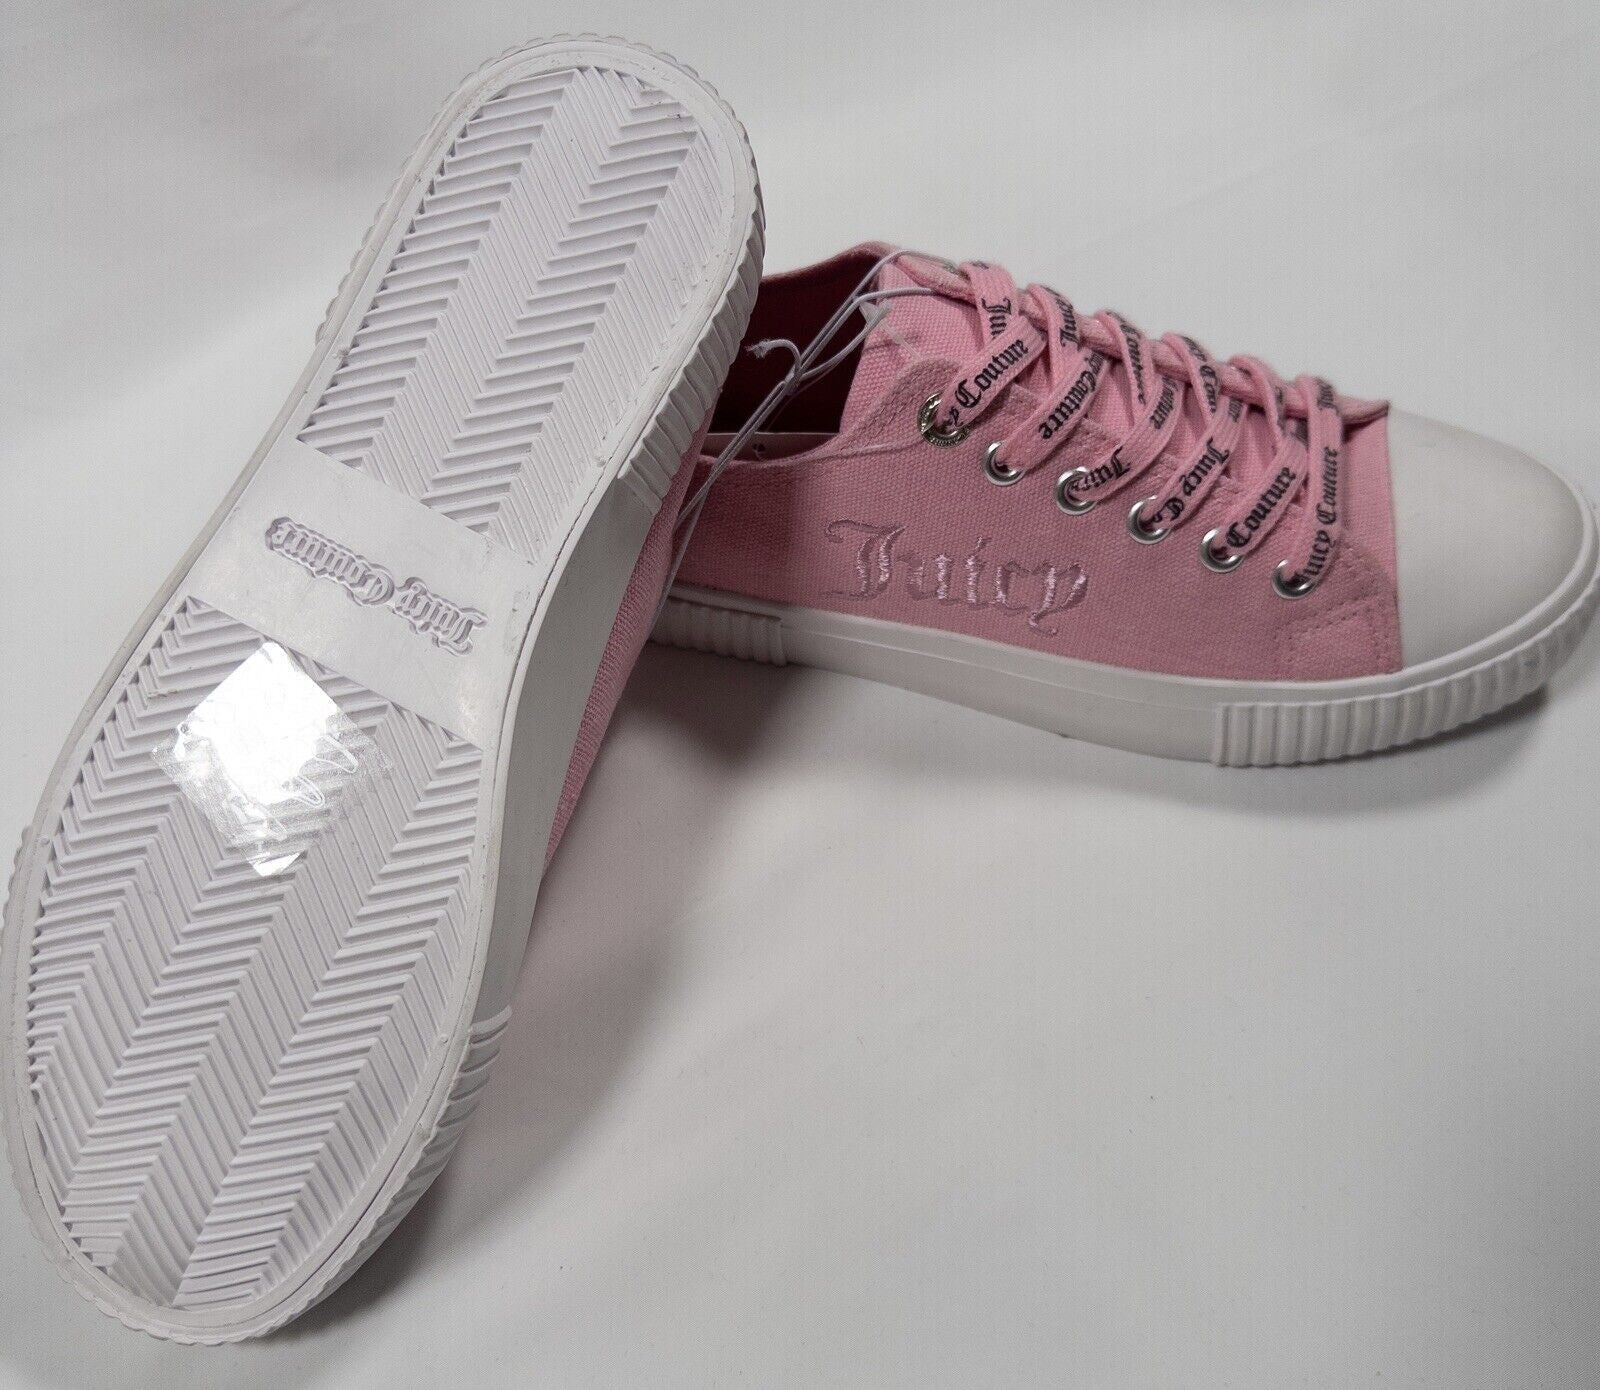 Juicy Couture Women's Pink Trainers Shoes Size UK 5